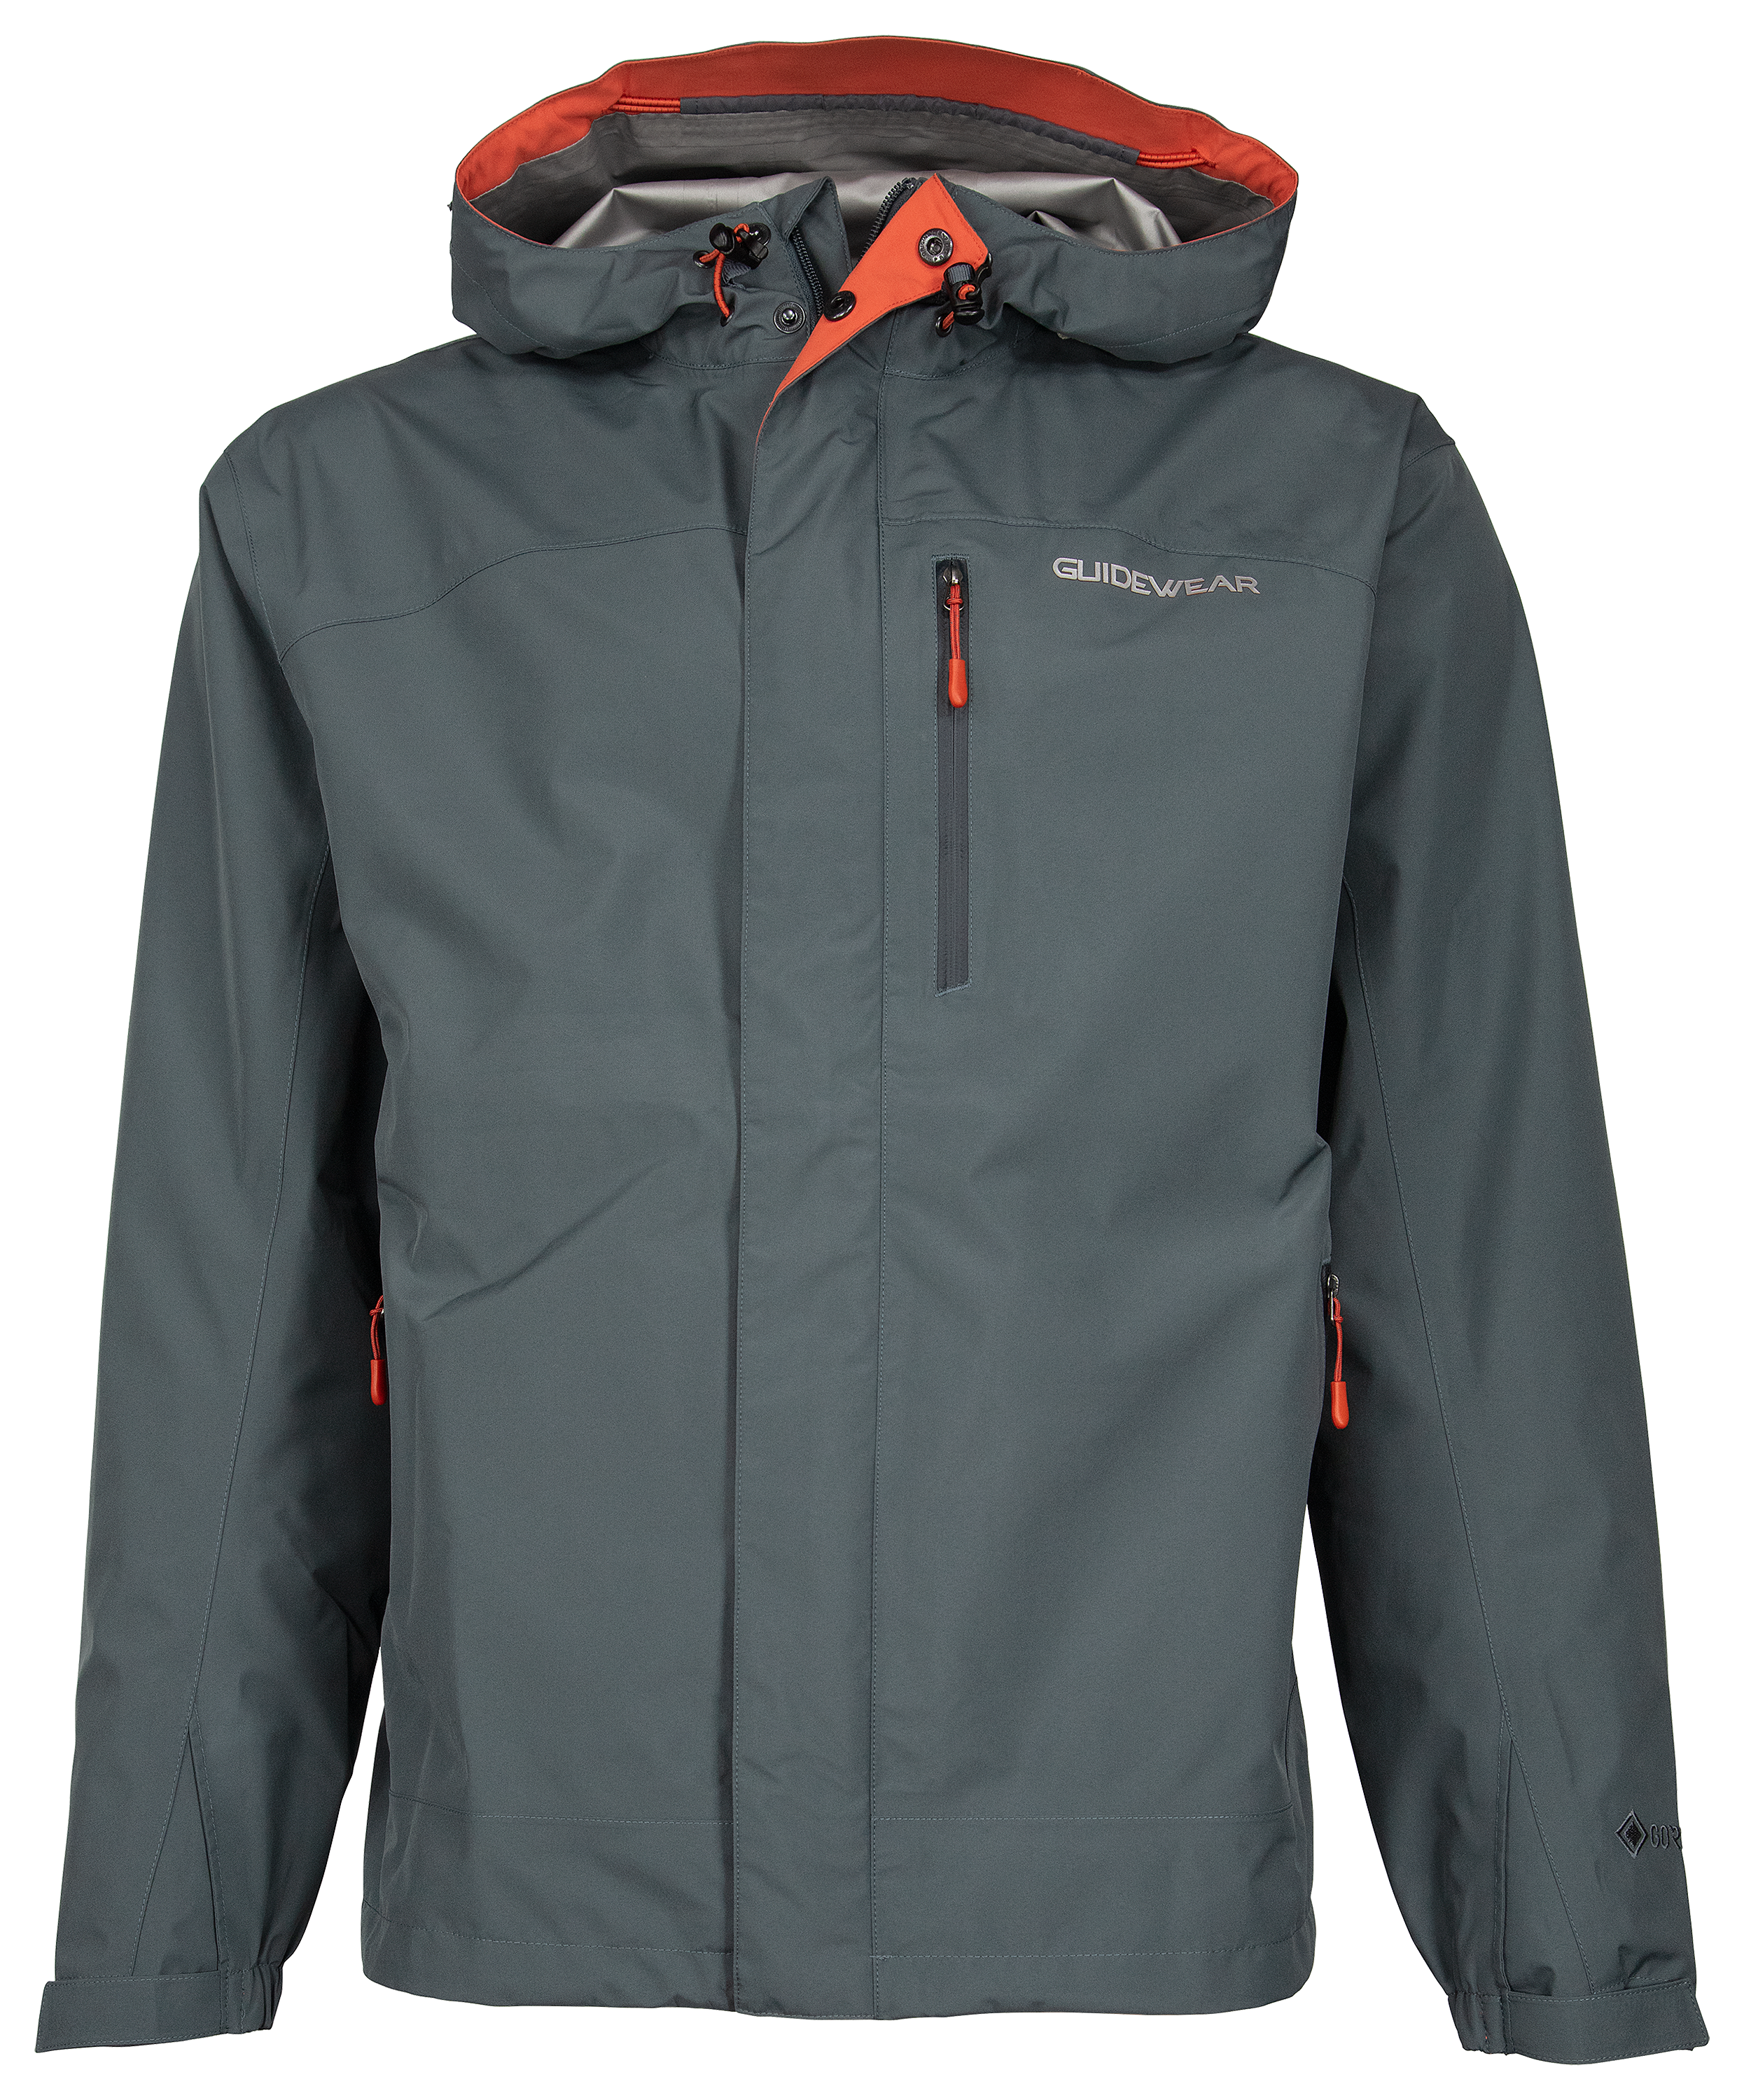 Johnny Morris Bass Pro Shops Guidewear Rainy River Jacket With Gore Tex Paclite For Men Bass Pro Shops